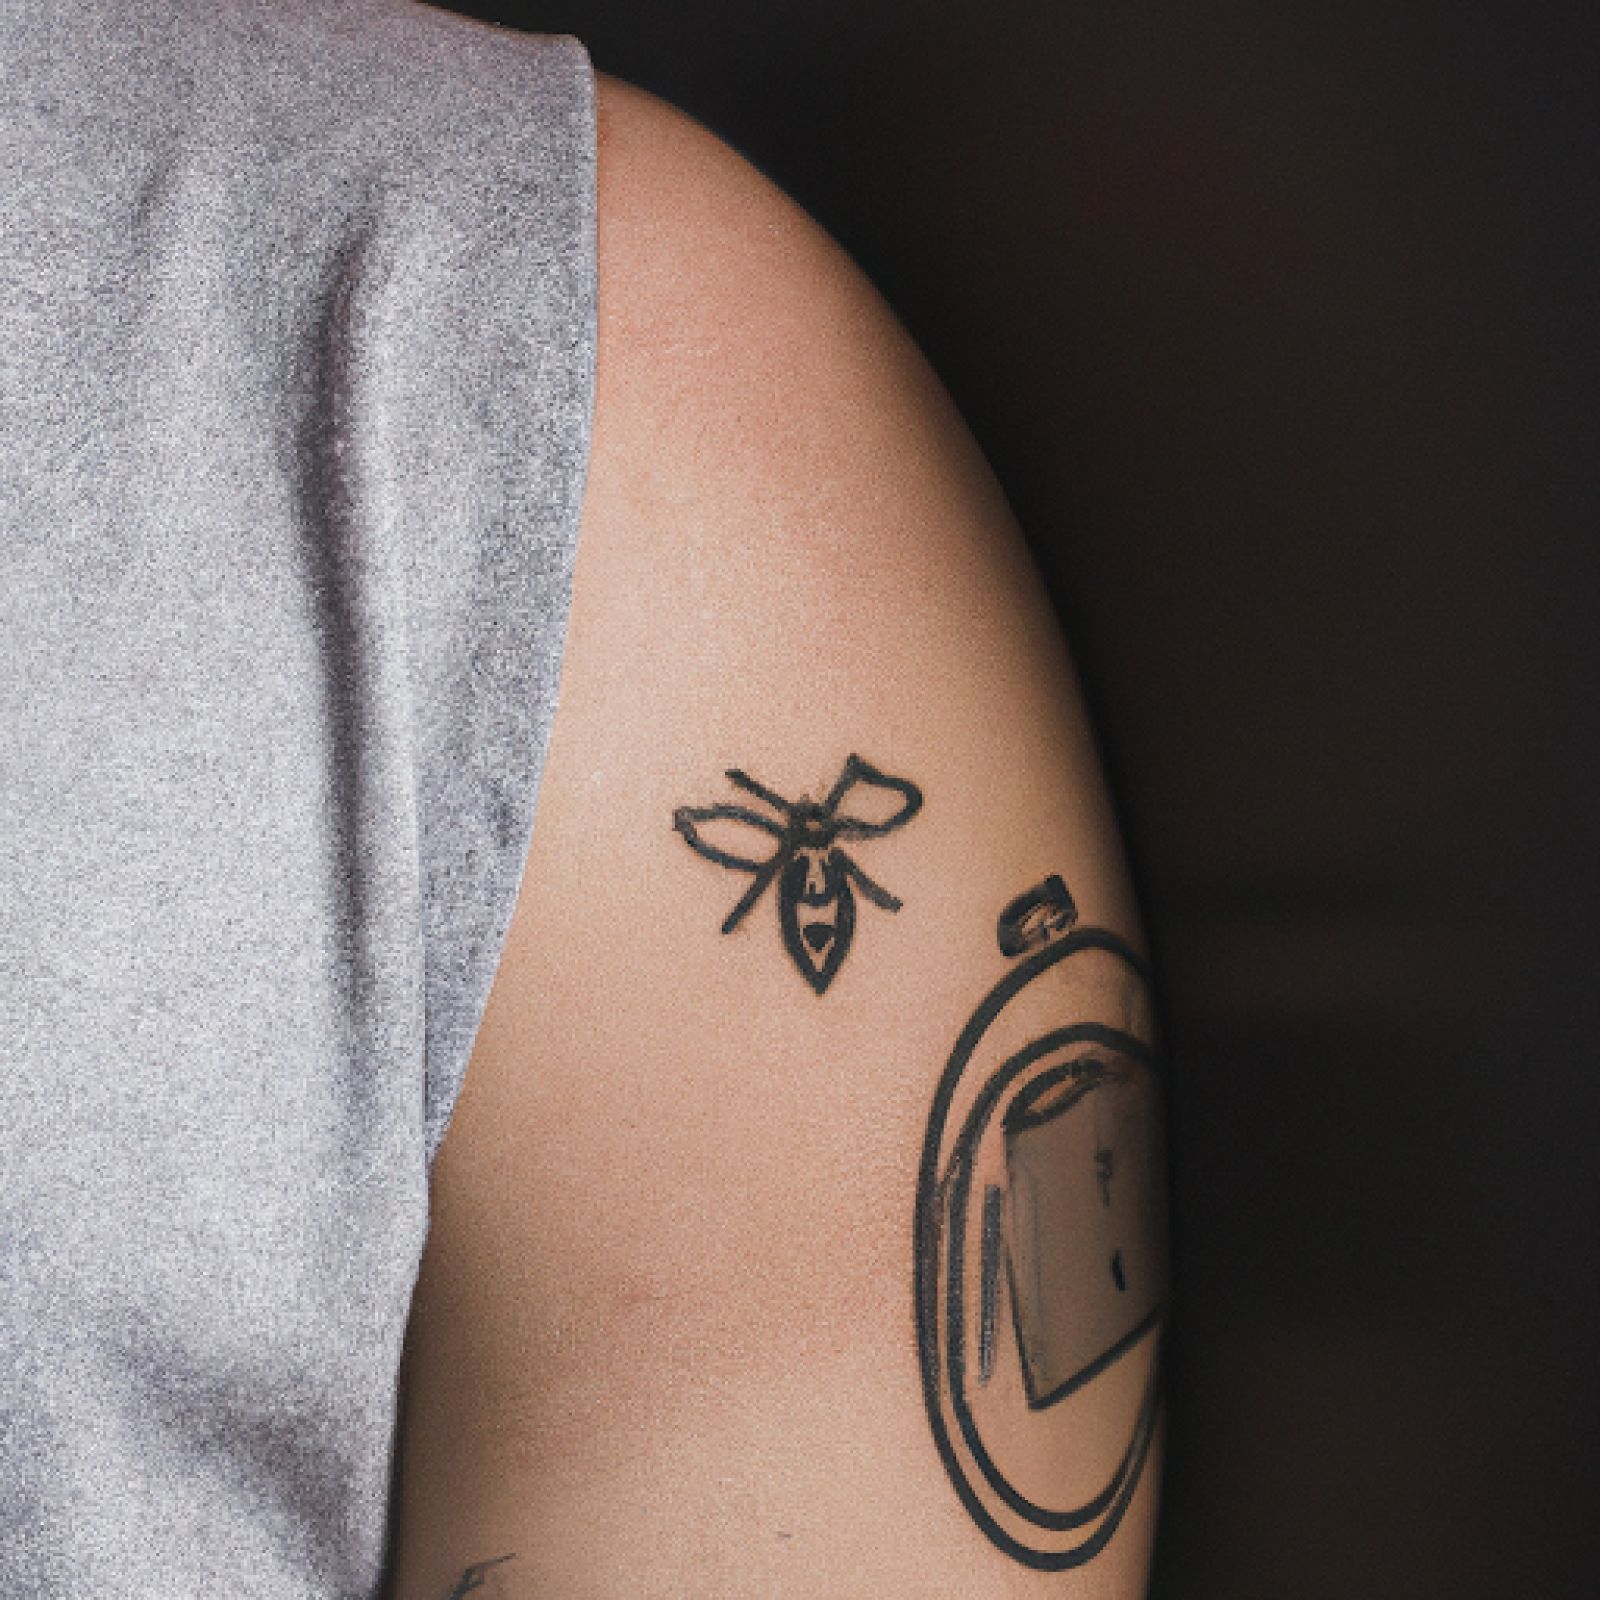 Bee tattoo on chest for men